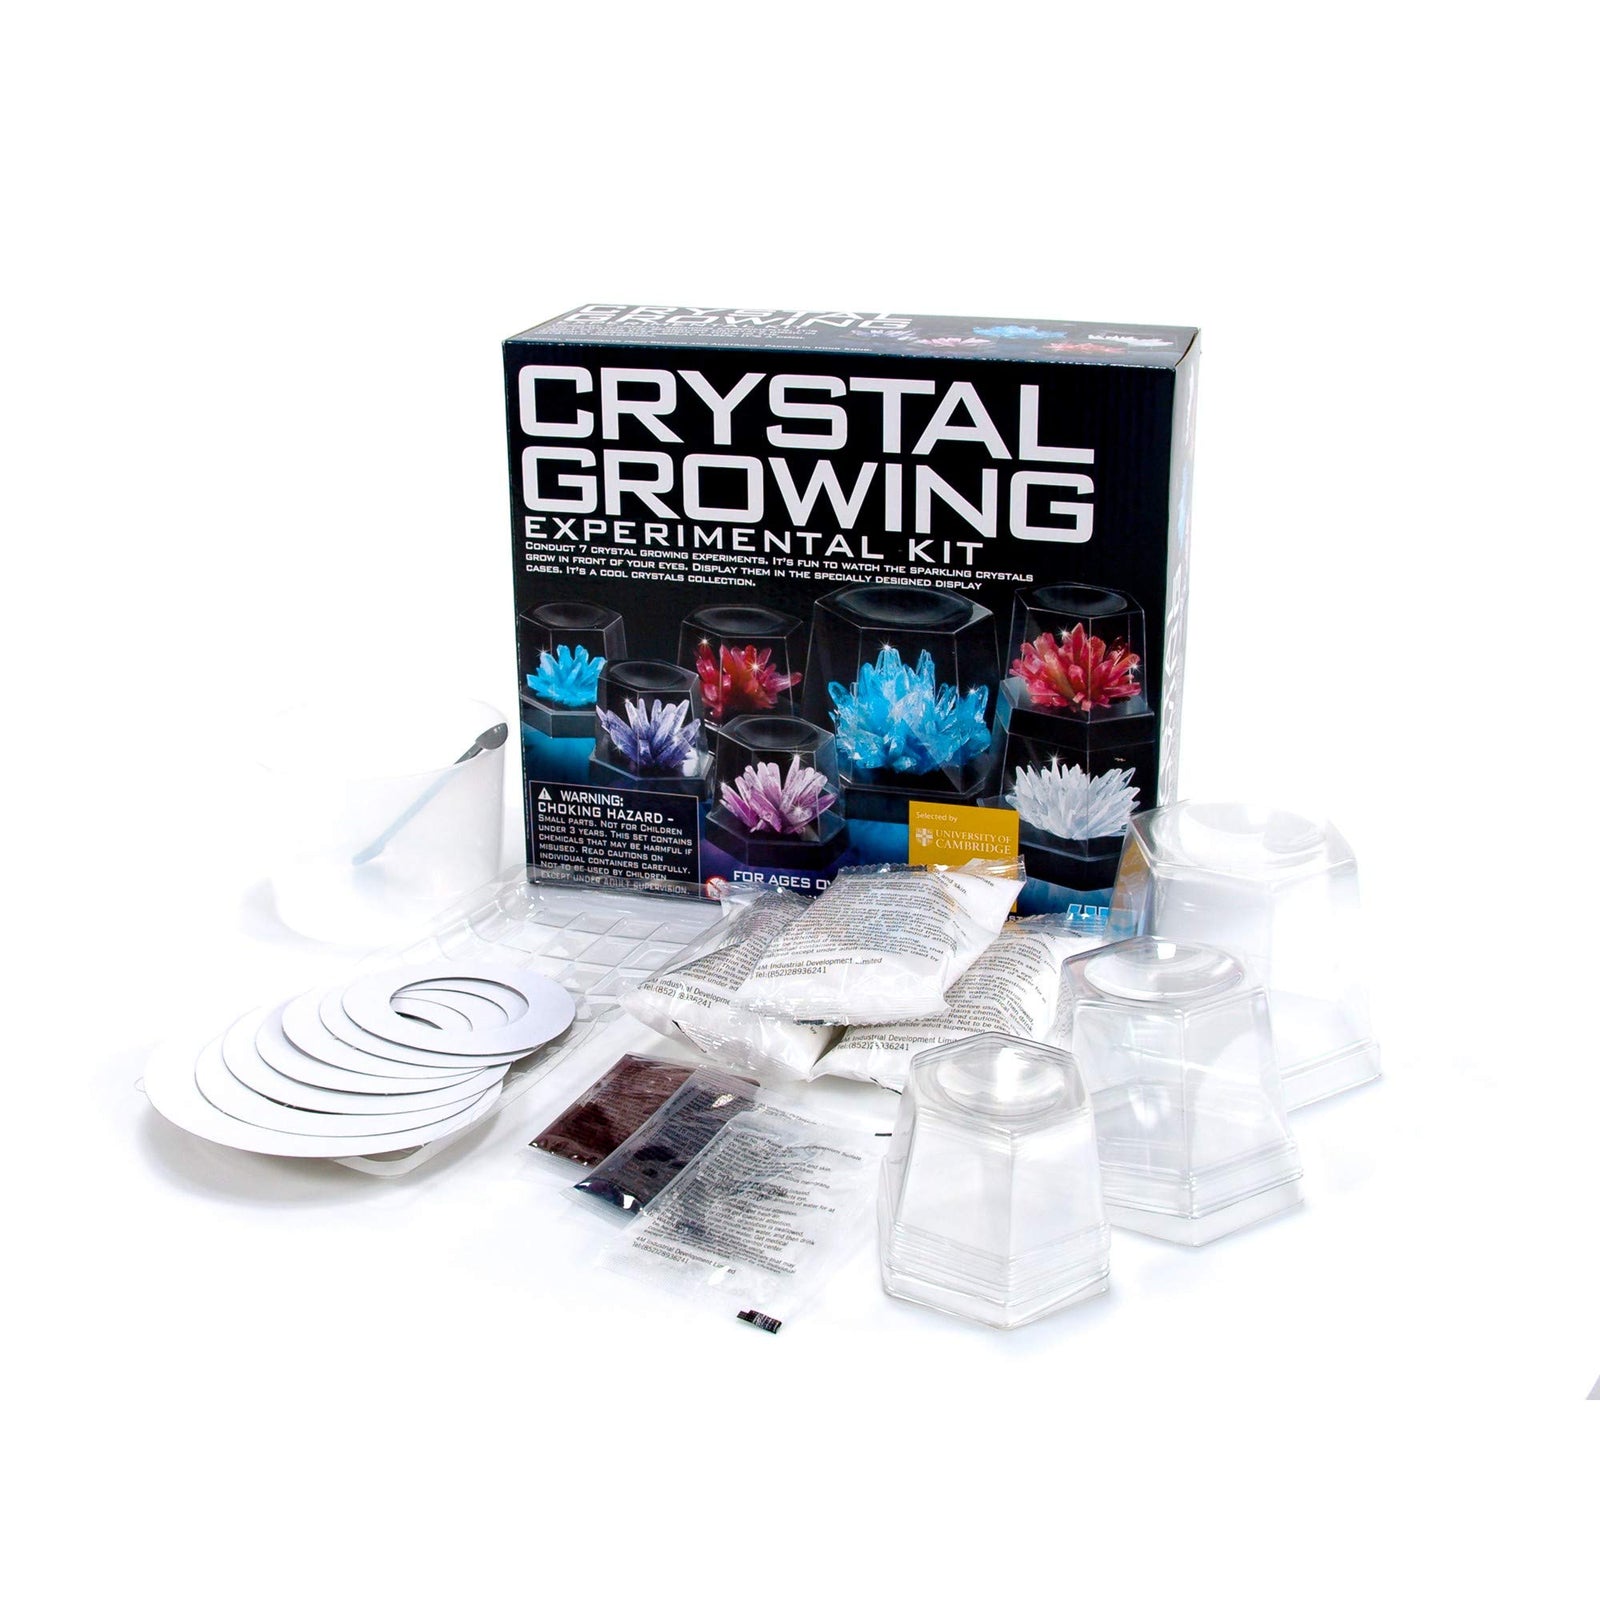 4M 5557 Crystal Growing Science Experimental Kit - 7 Crystal Science Experiments with Display Cases - Easy DIY STEM Toy Lab Experiment Specimens, Educational Gift for Kids, Teens, Boys & Girls